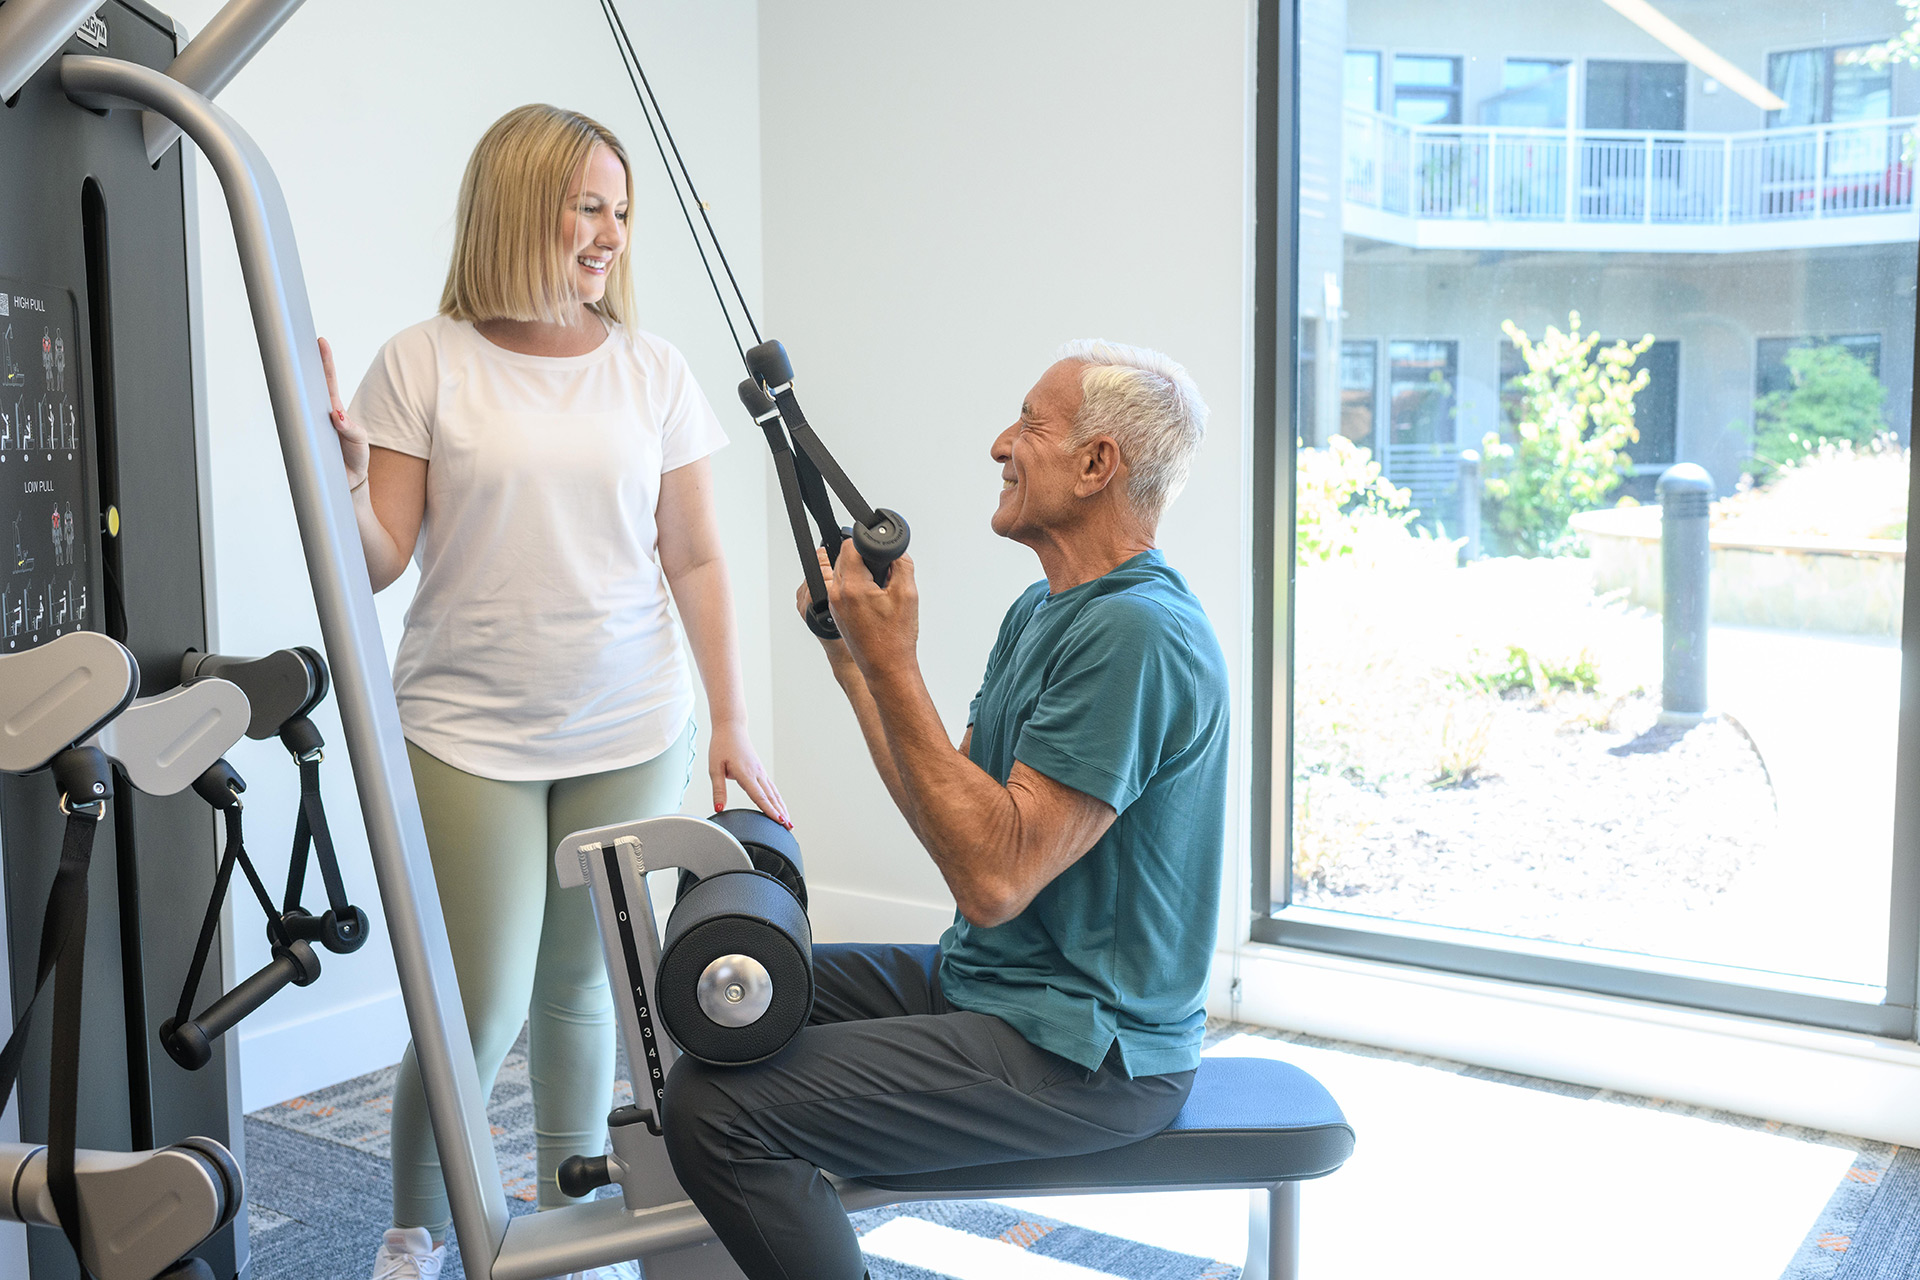 A resident is using a fitness machine in the fitness center.